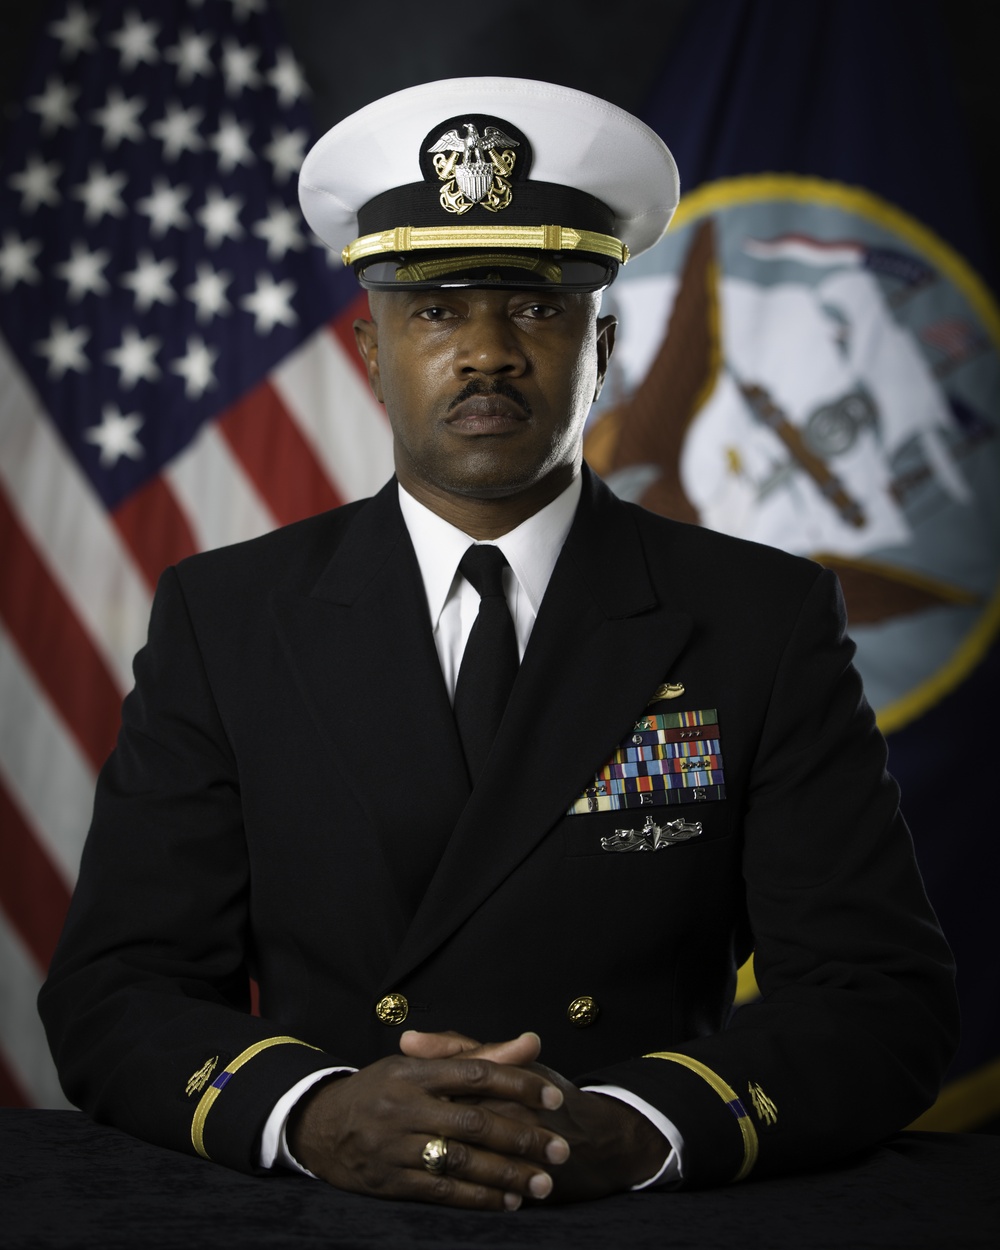 Official portrait, Command Information Officer, Field Support Activity, Chief Warrant Officer Norman W. Dixson, US Navy